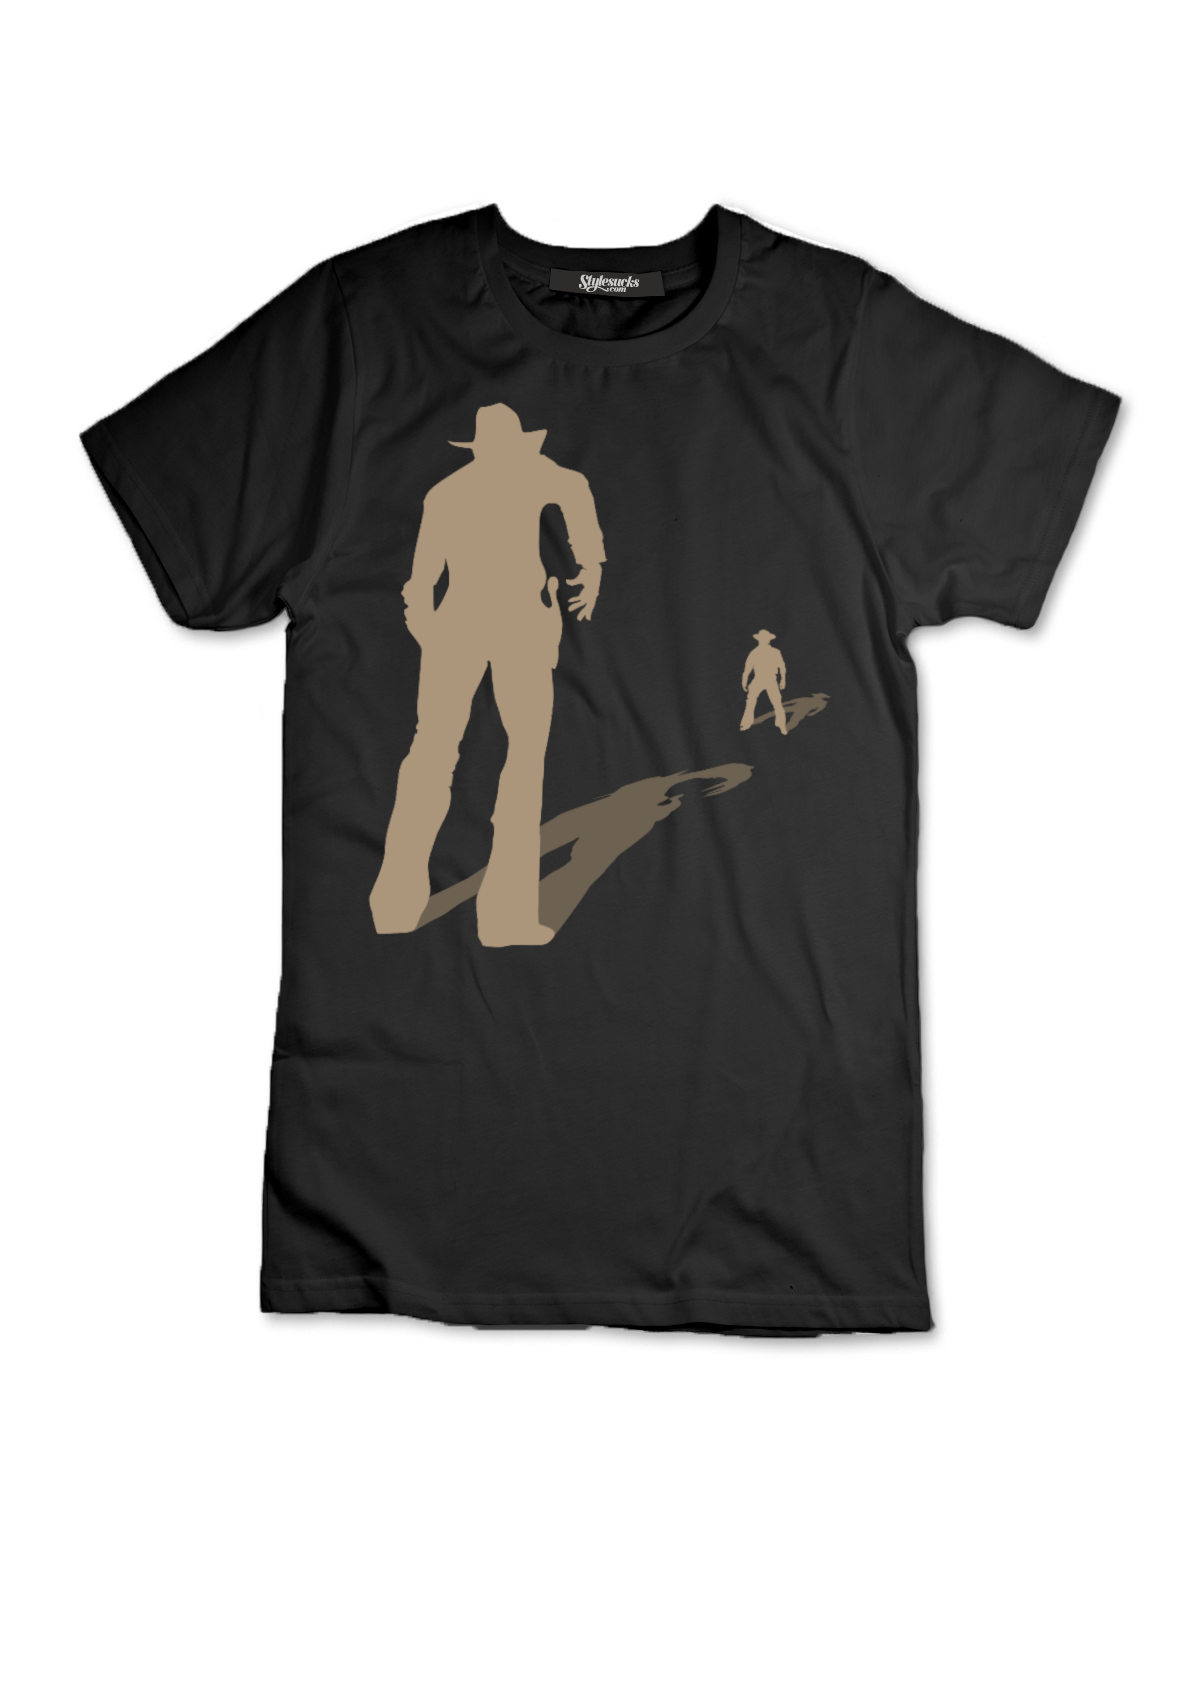 The Duel T-Shirt